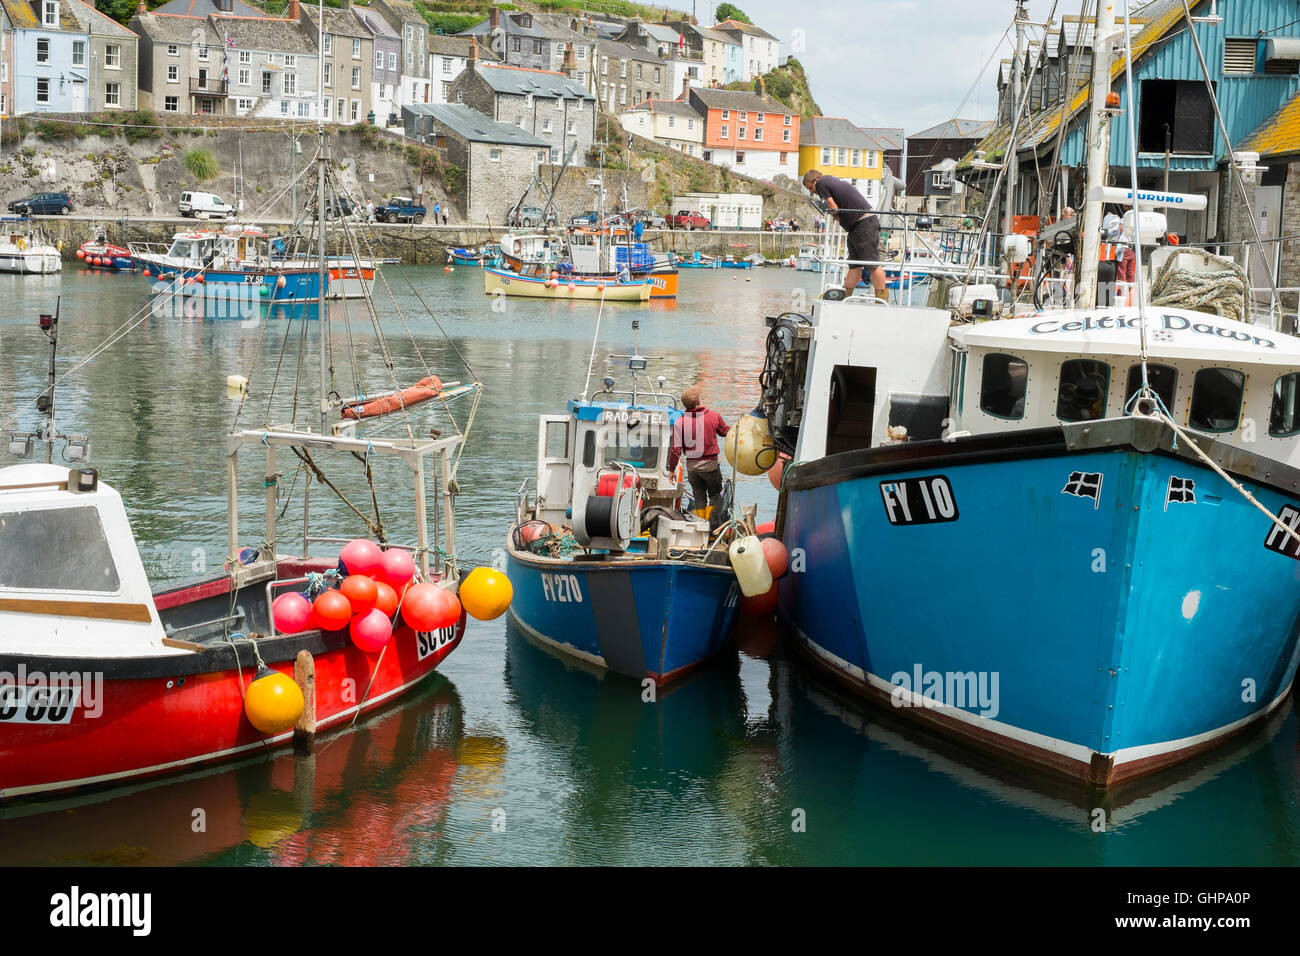 Fisherman and boats in Mevagissey Harbour, Cornwall, England, UK Stock Photo